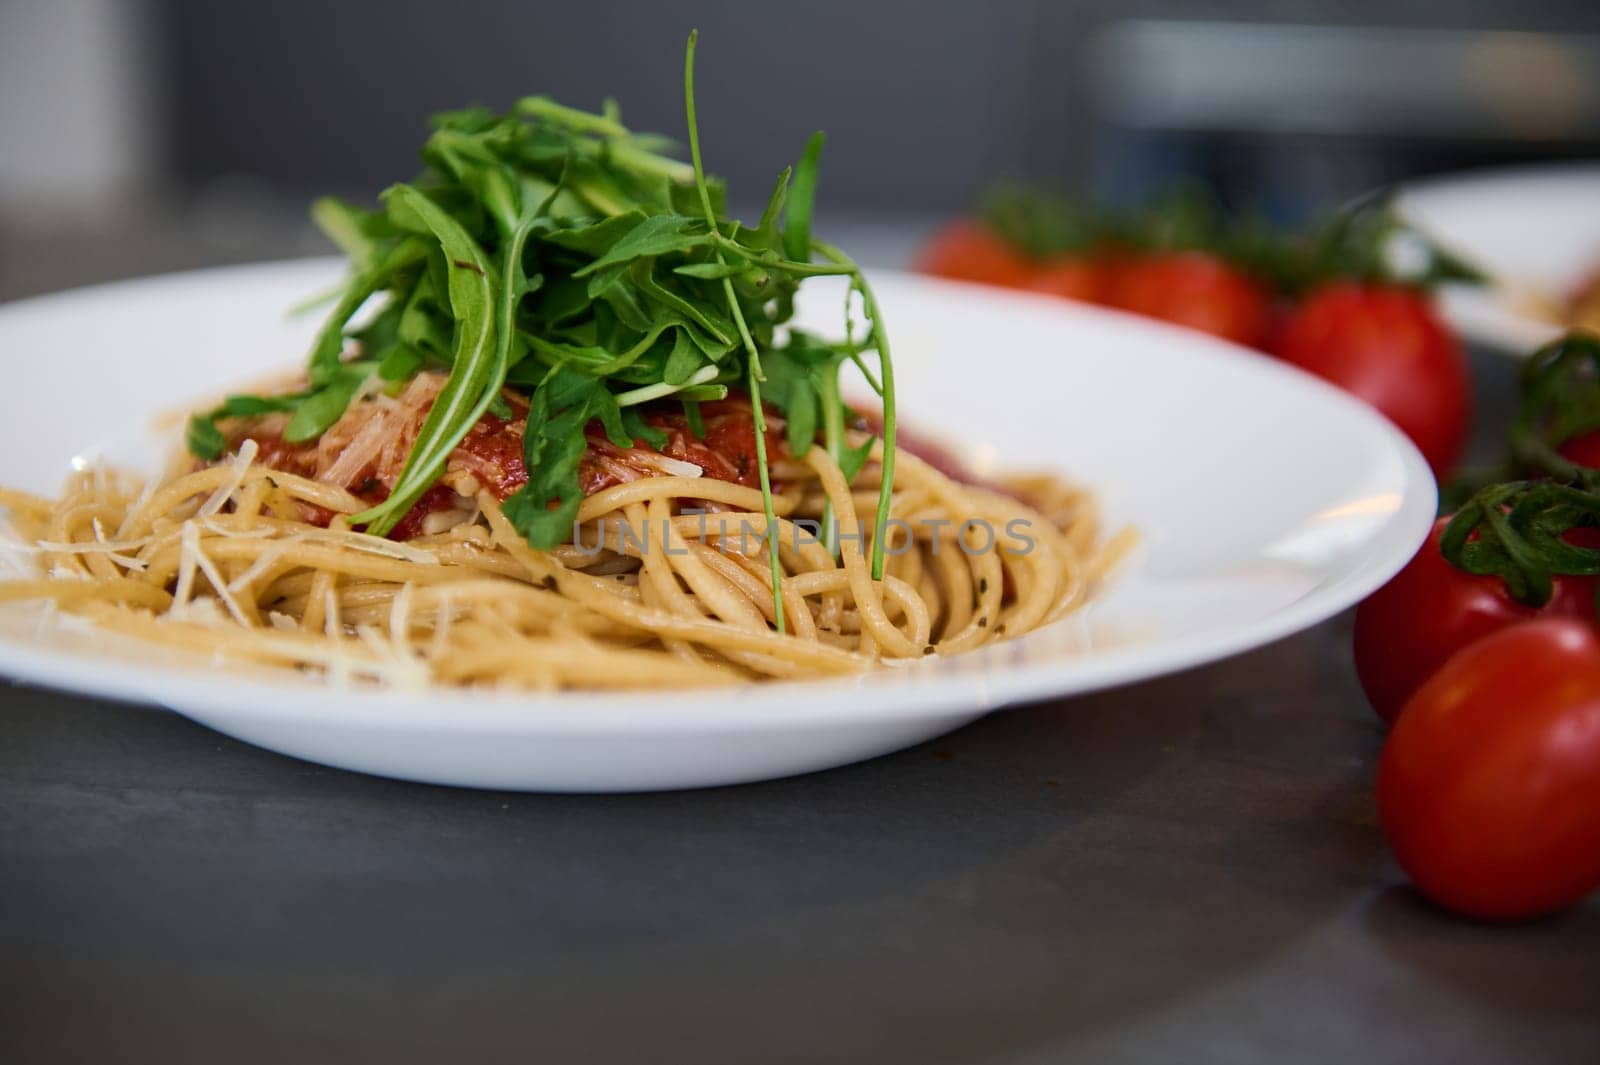 Italian pasta. Fresh homemade spaghetti capellini pasta with tomato sauce and garnished with arugula green leaves on the kitchen table near a branch of organic tomato cherry. Food background